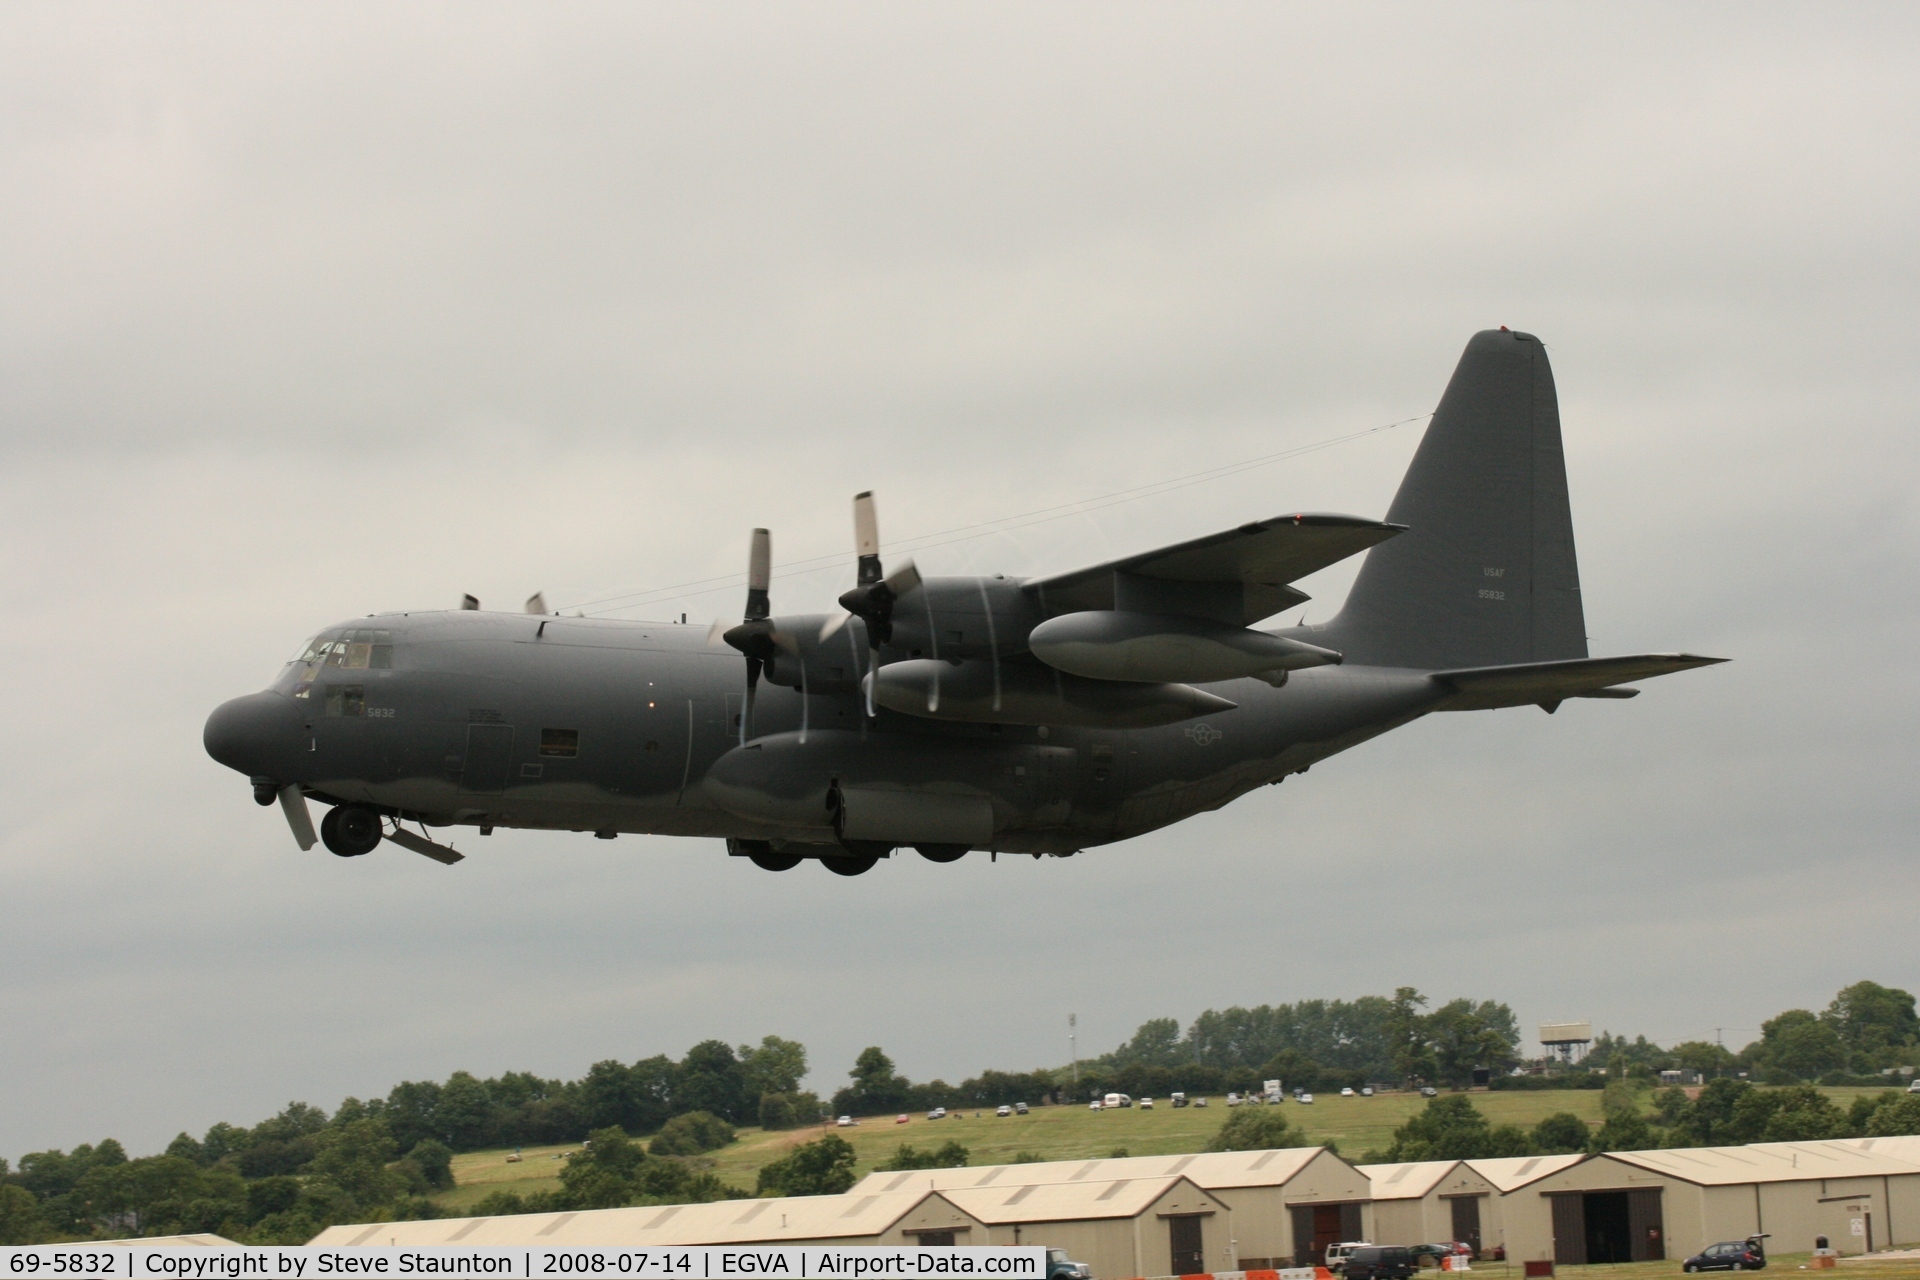 69-5832, 1970 Lockheed MC-130P Combat Shadow C/N 382-4381, Taken at the Royal International Air Tattoo 2008 during arrivals and departures (show days cancelled due to bad weather)